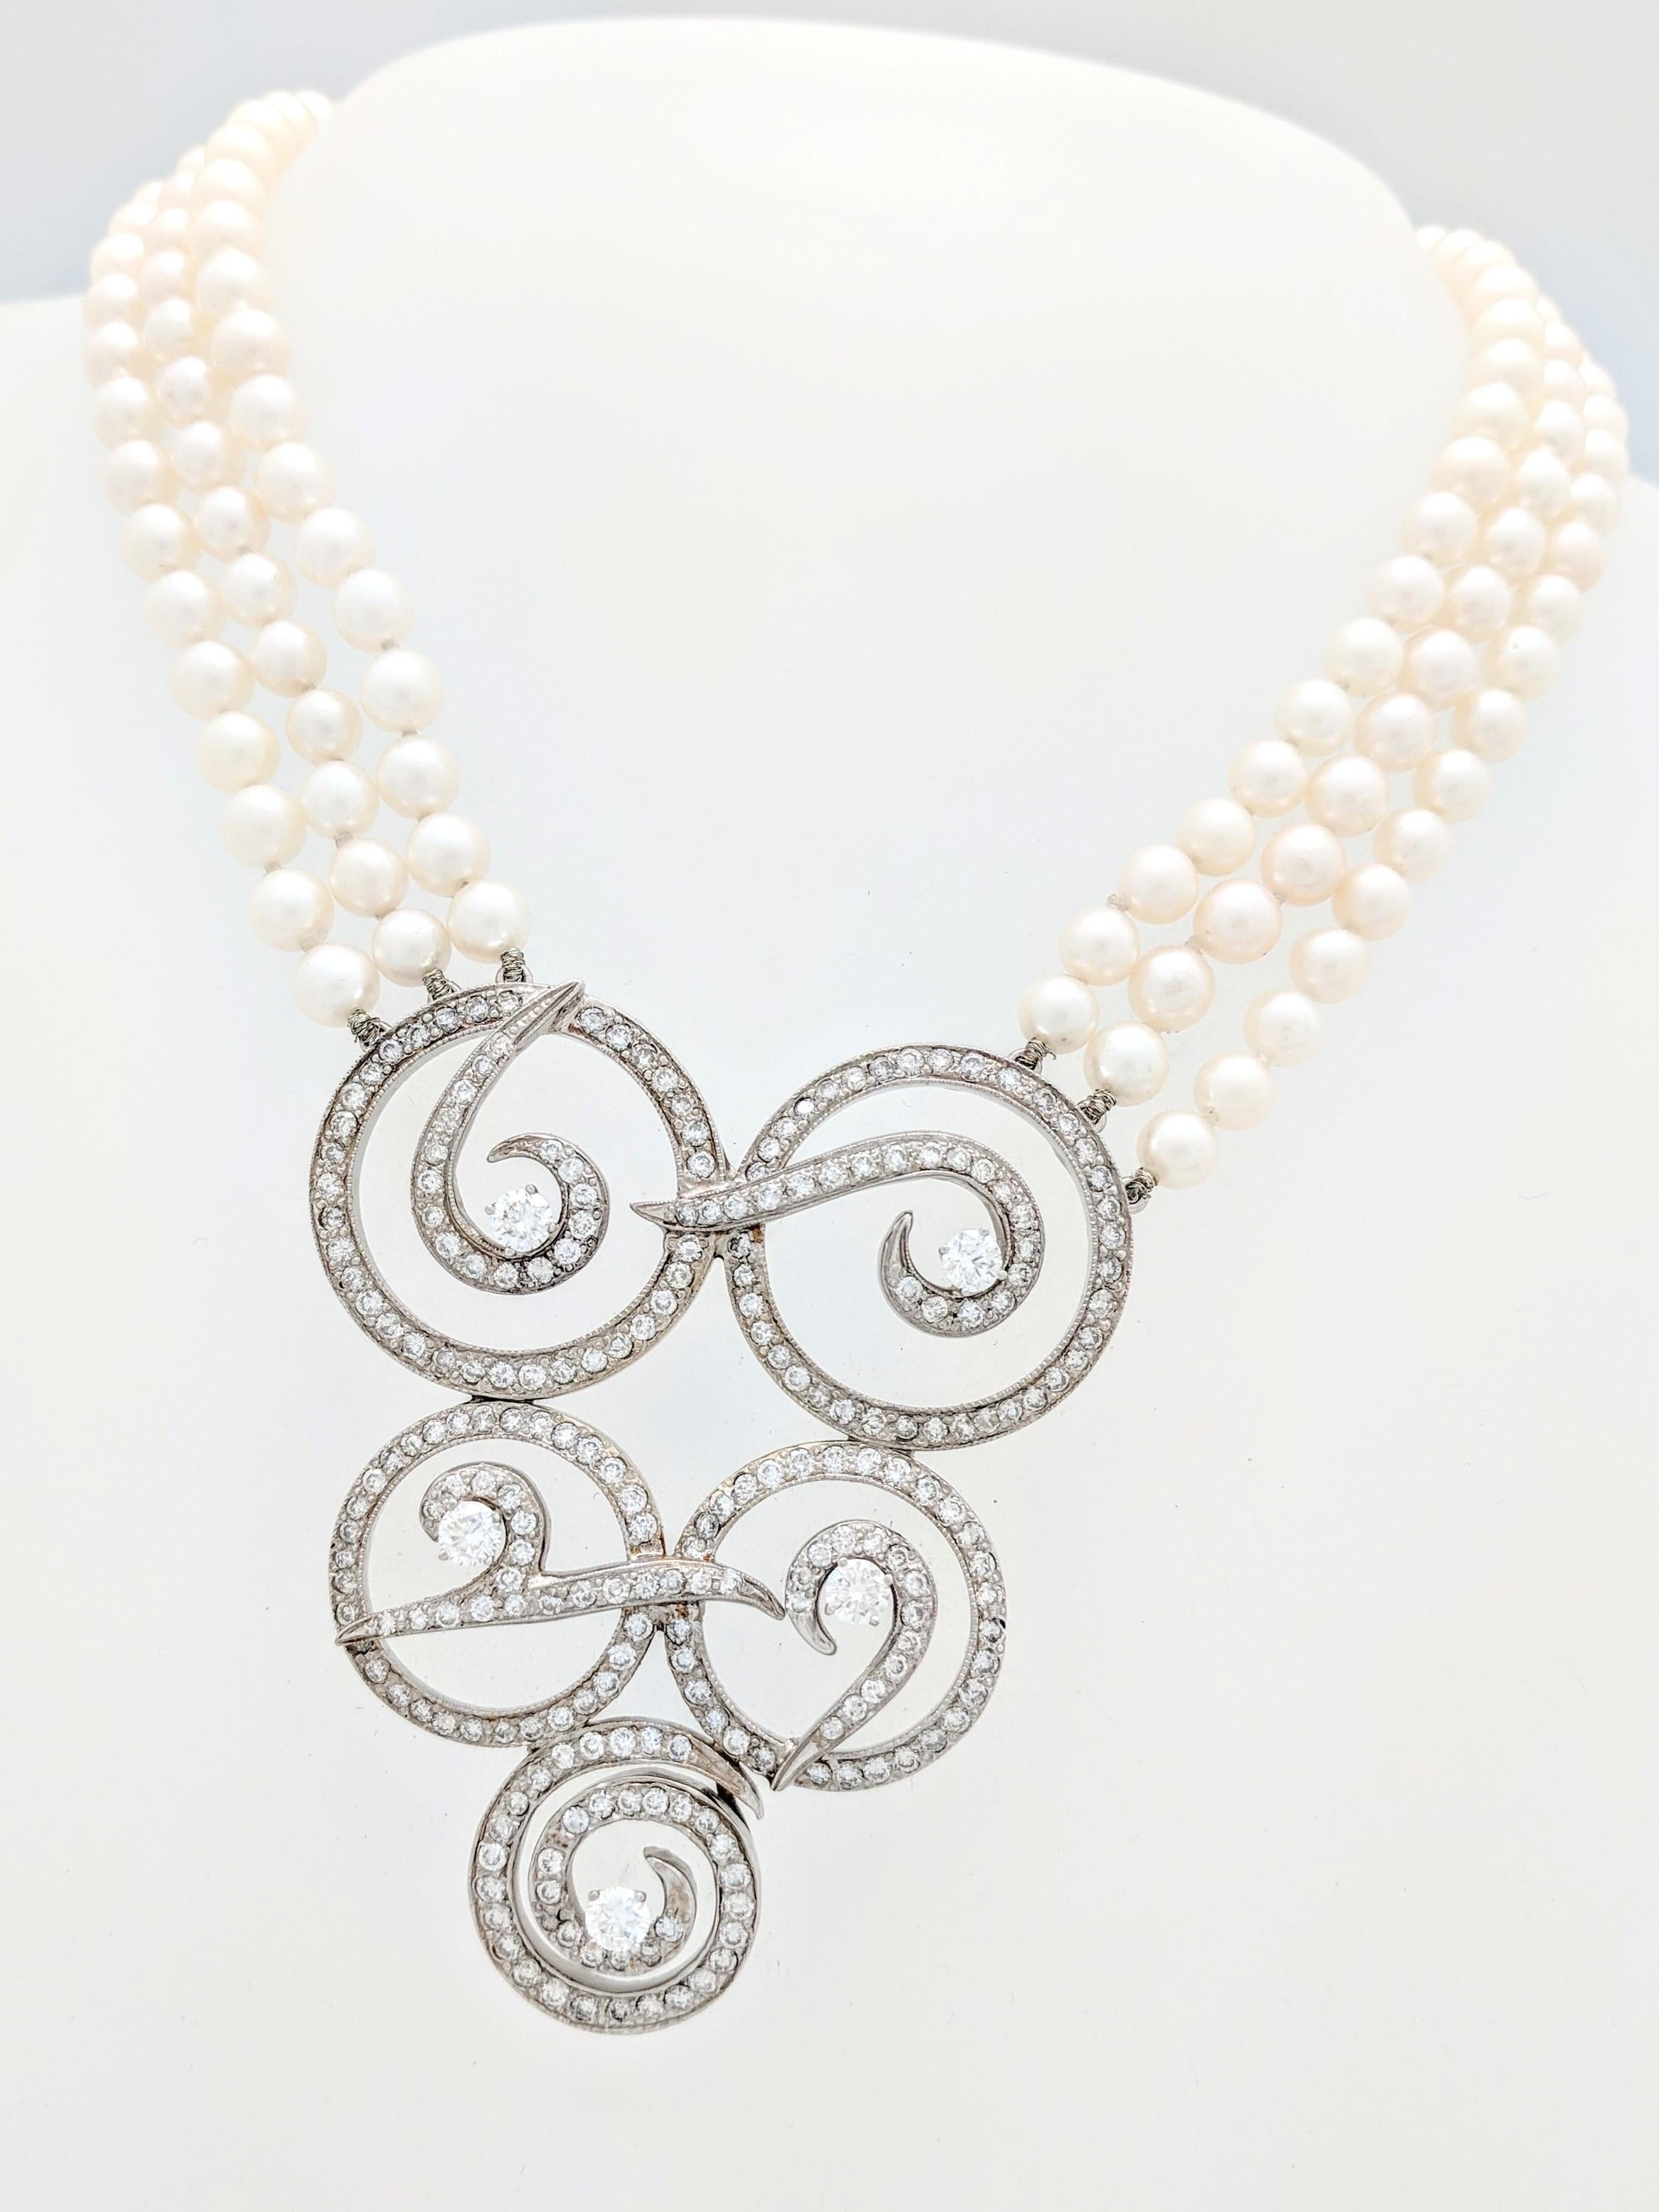 You are viewing an exquisite Estate/Vintage Multi Strand Akoya Pearl and 5ct Diamond Enhancer Necklace.

This piece is circa 1940-50's and is in overall excellent condition for a piece of its age. The pictures do not show the beauty of it and you